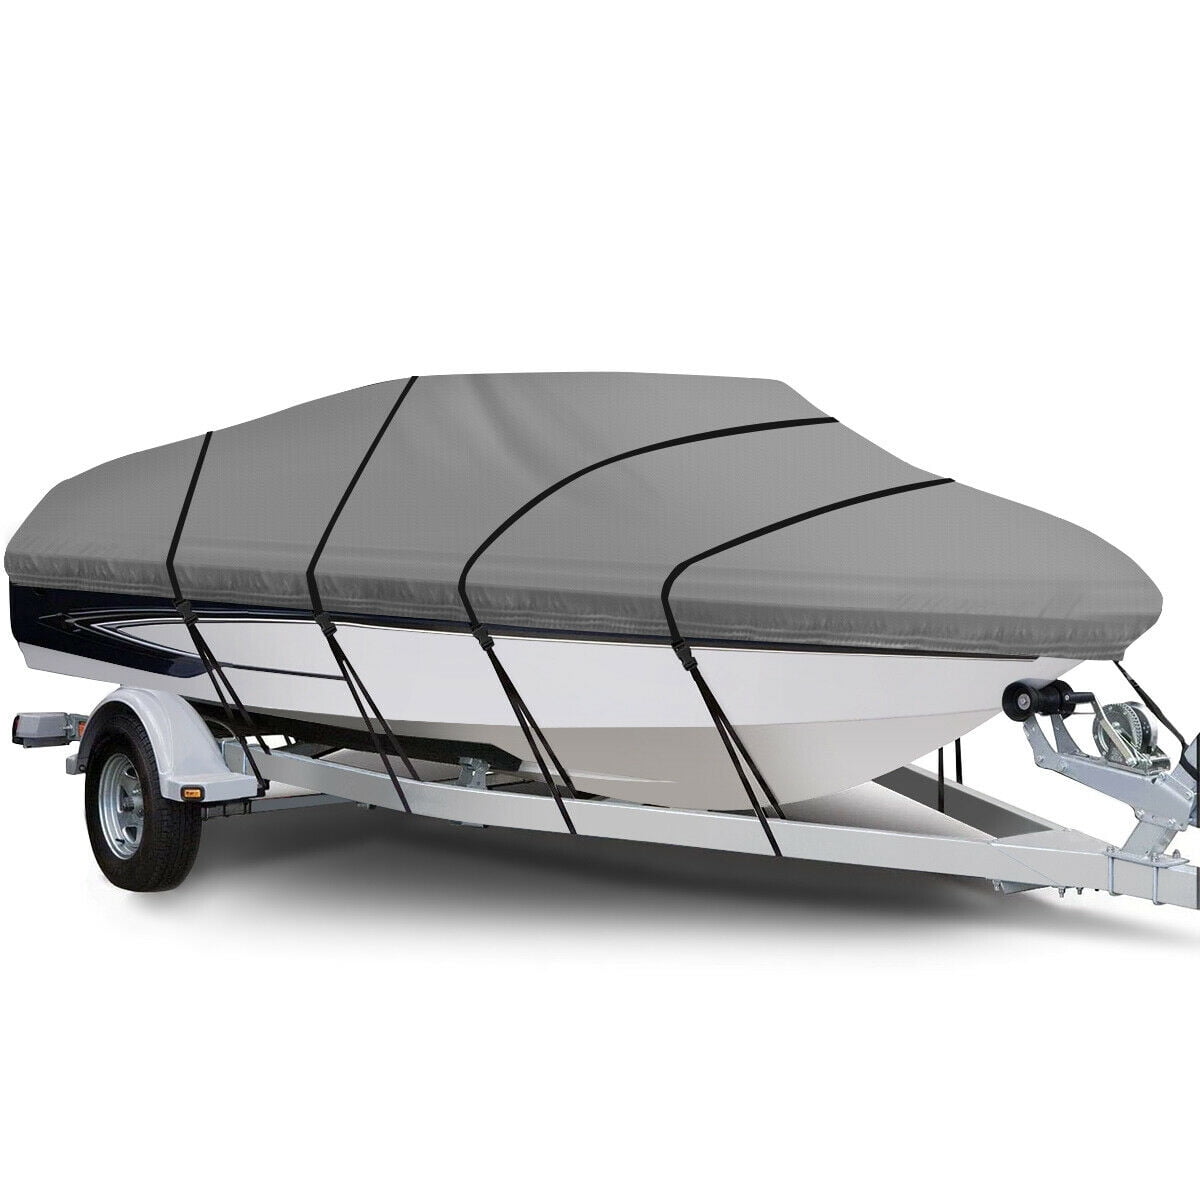 1719FT x 95" Beam Width Yitamotor VHull Boat Cover, Waterproof and UV Resistant Protection for